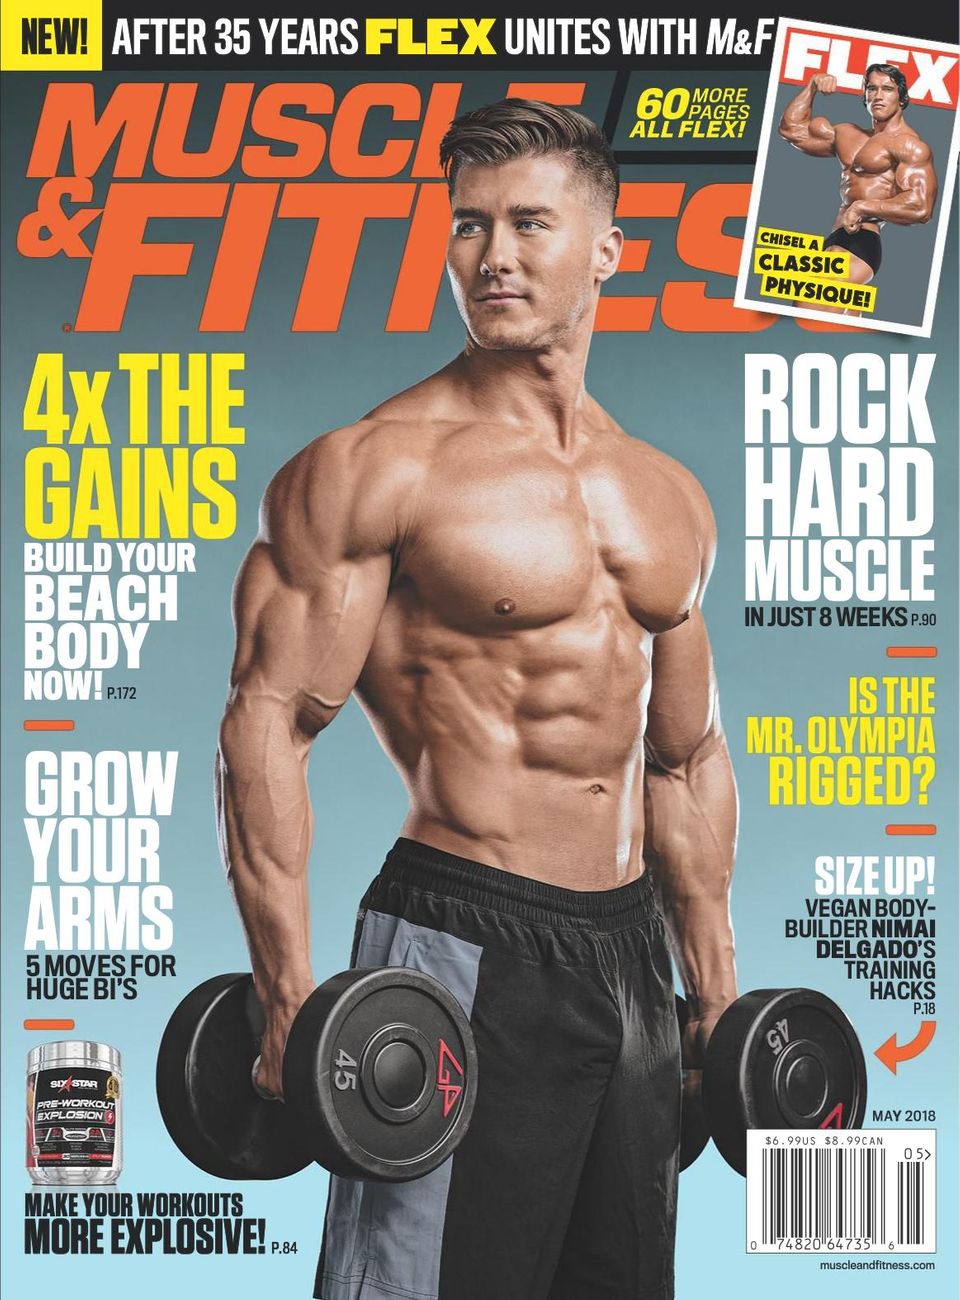 Muscle fitness hers usa may 2018 by nguyenducthanhminh - Issuu